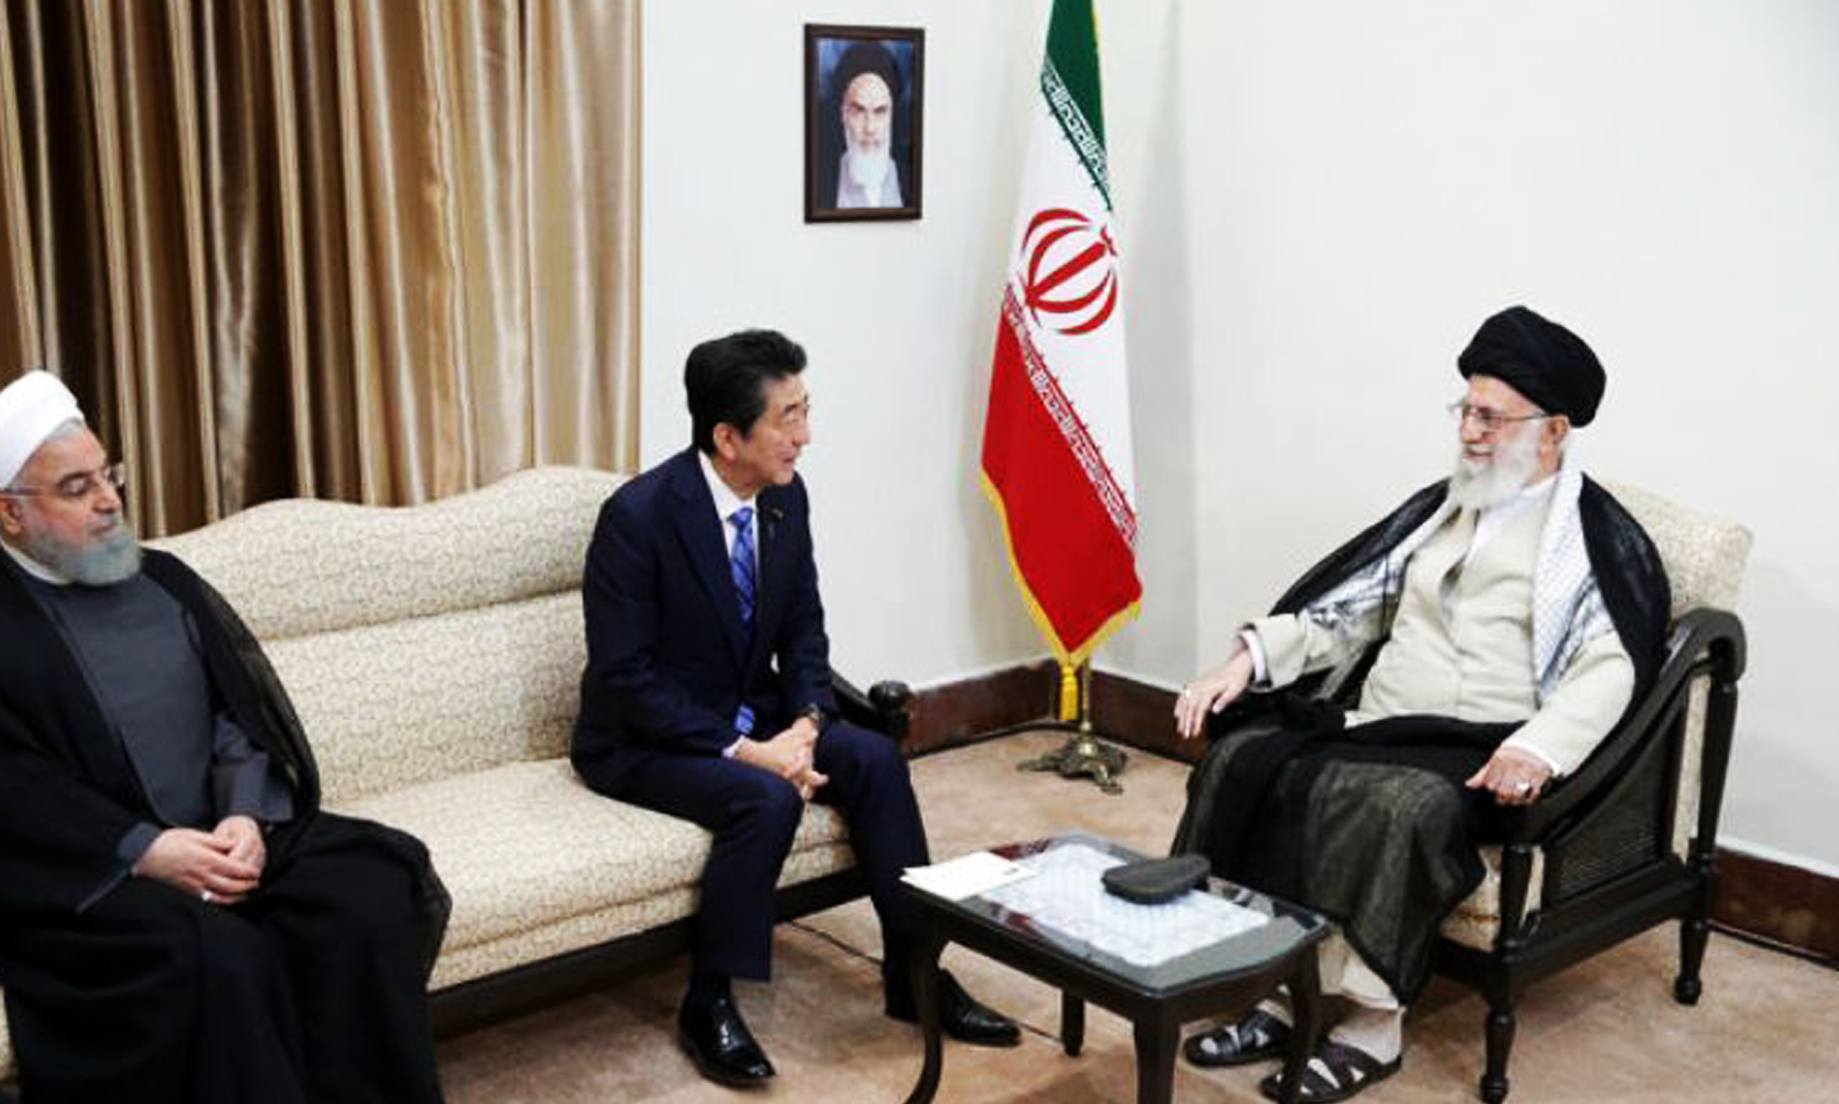 Iran supreme leader vows not to make or use nuclear arms: Japan PM